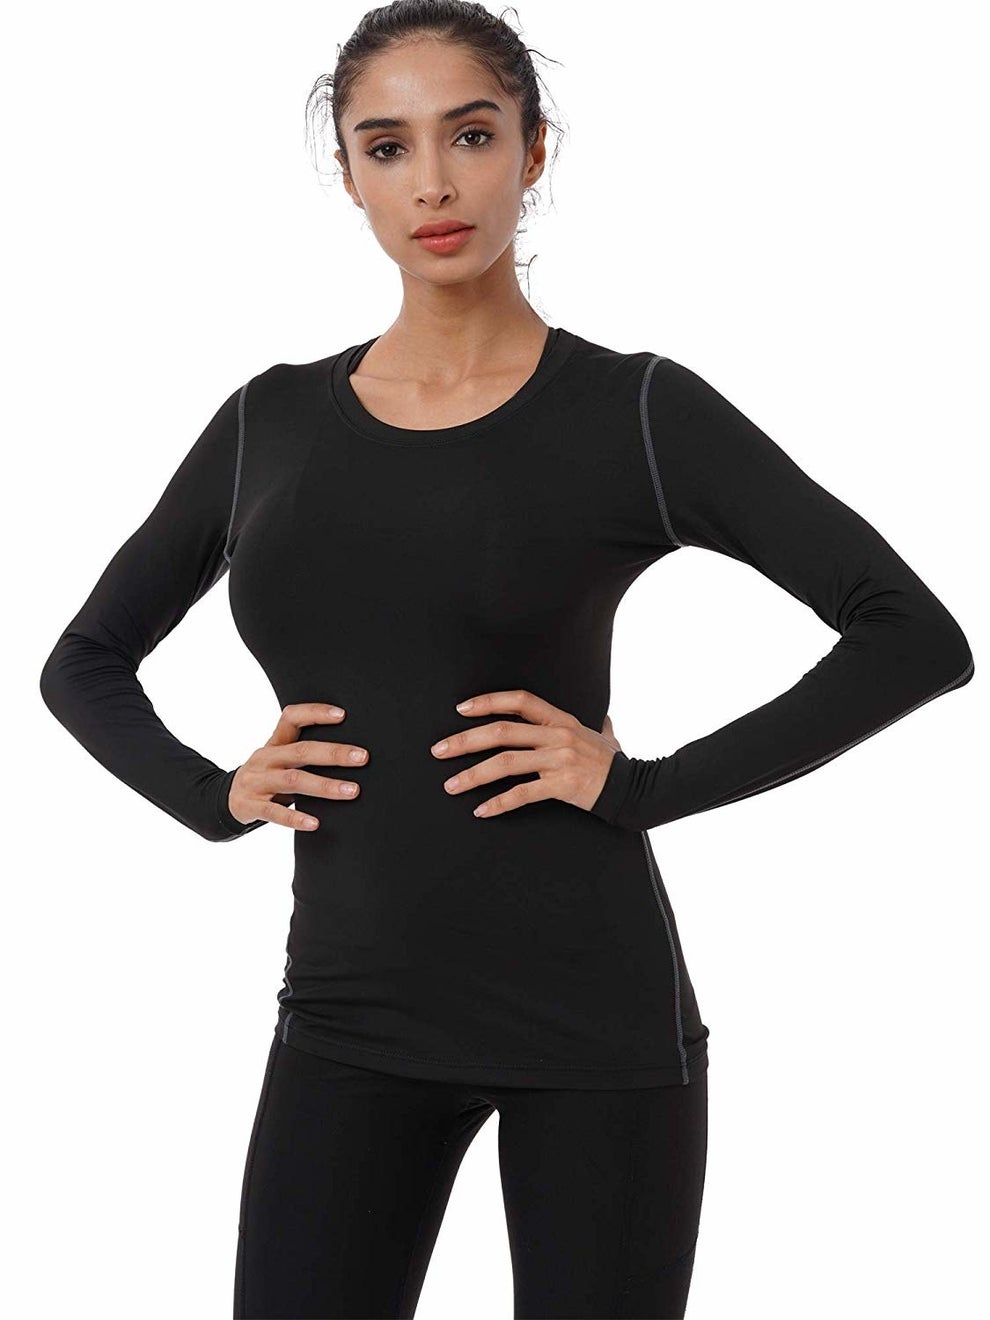 31 Pieces Of Breathable Workout Clothes For Exercising